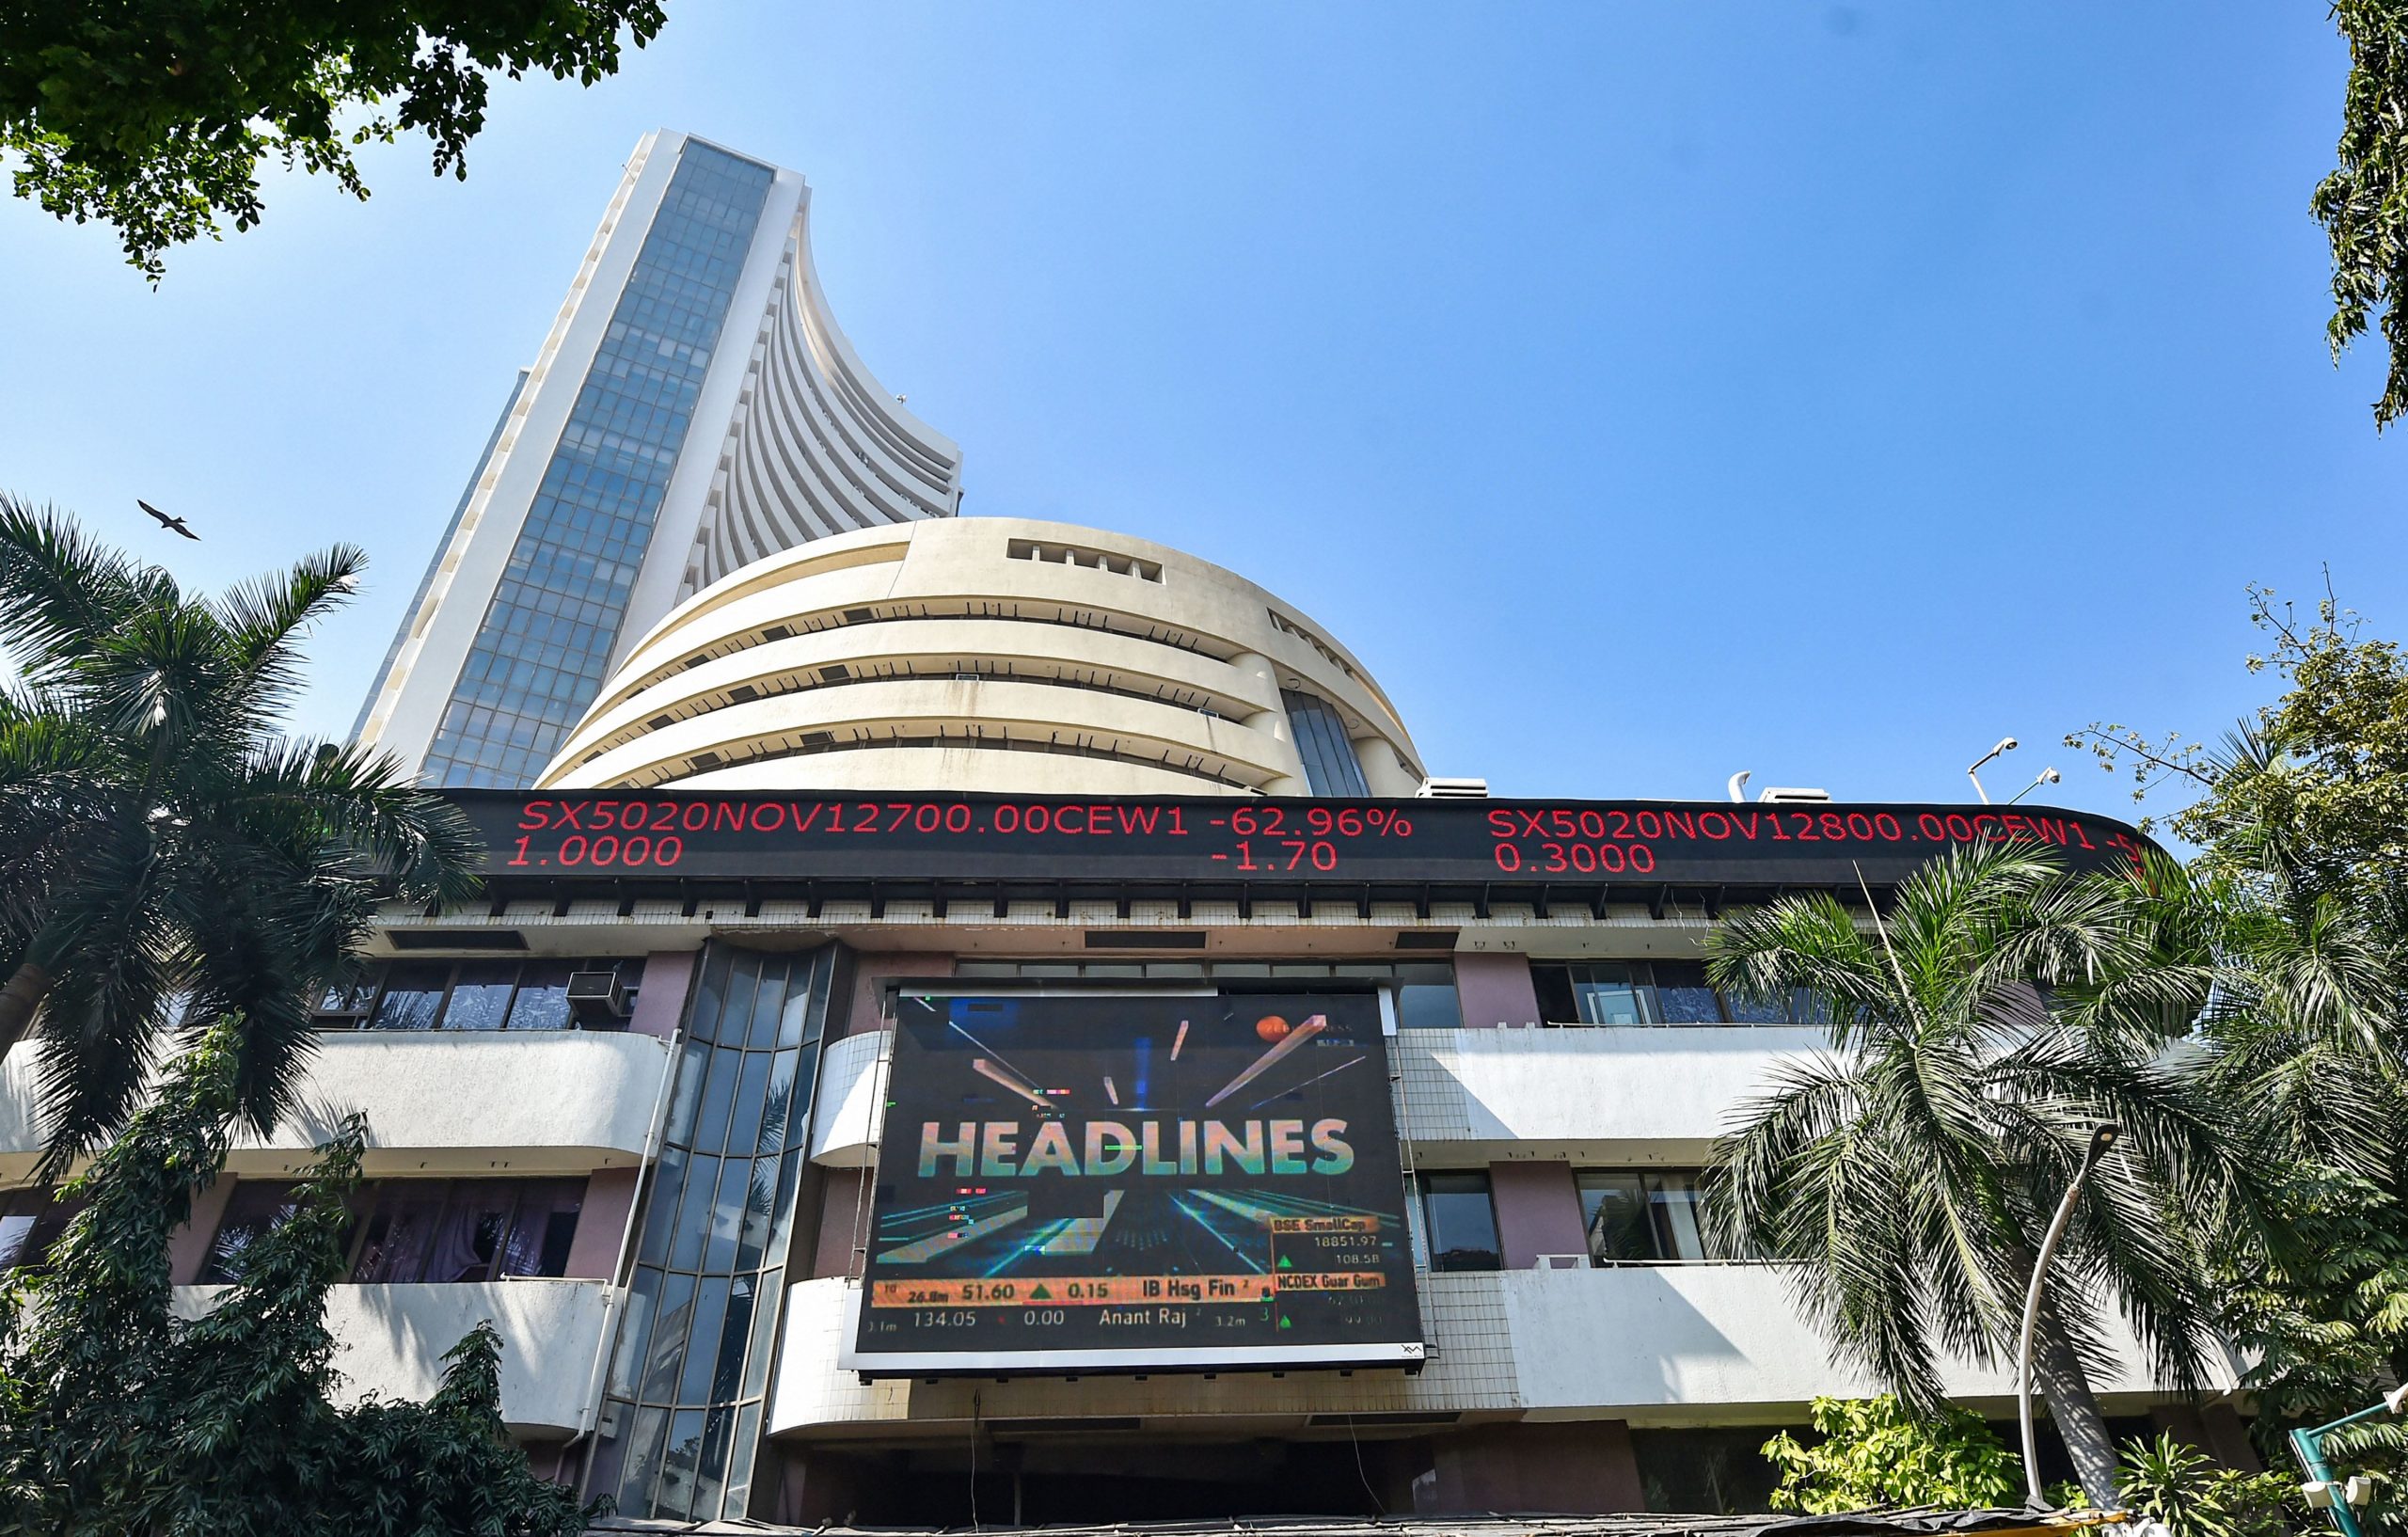 Trending Stocks: Hindalco, Coal India, Glenmark and others in news today